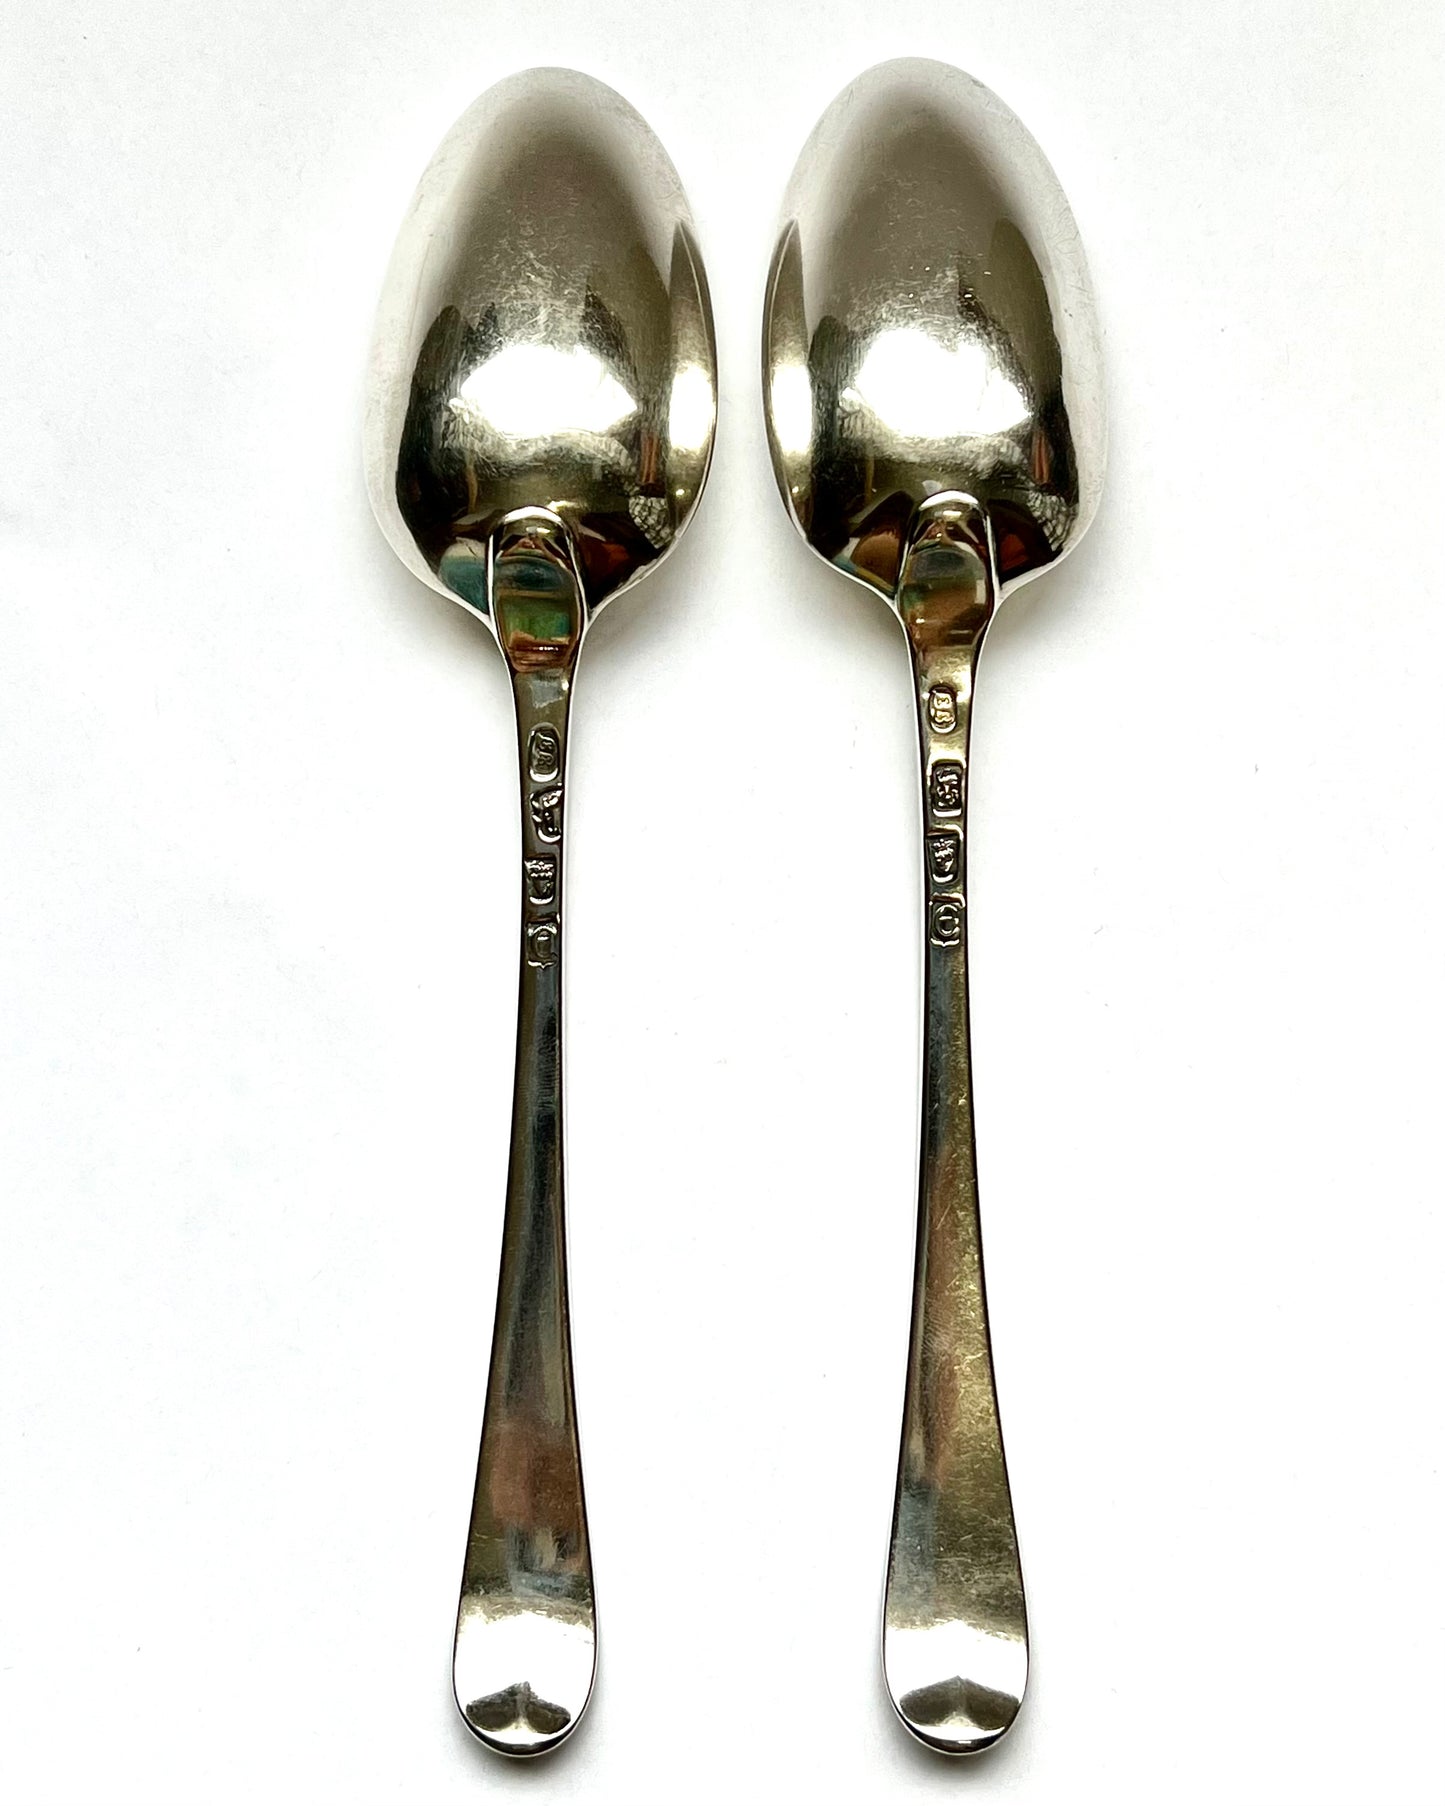 Pair of Georgian sterling silver tablespoons, Blakemore crest, bright cut pattern. Australian convict history. Thomas Tooke, London, 1780